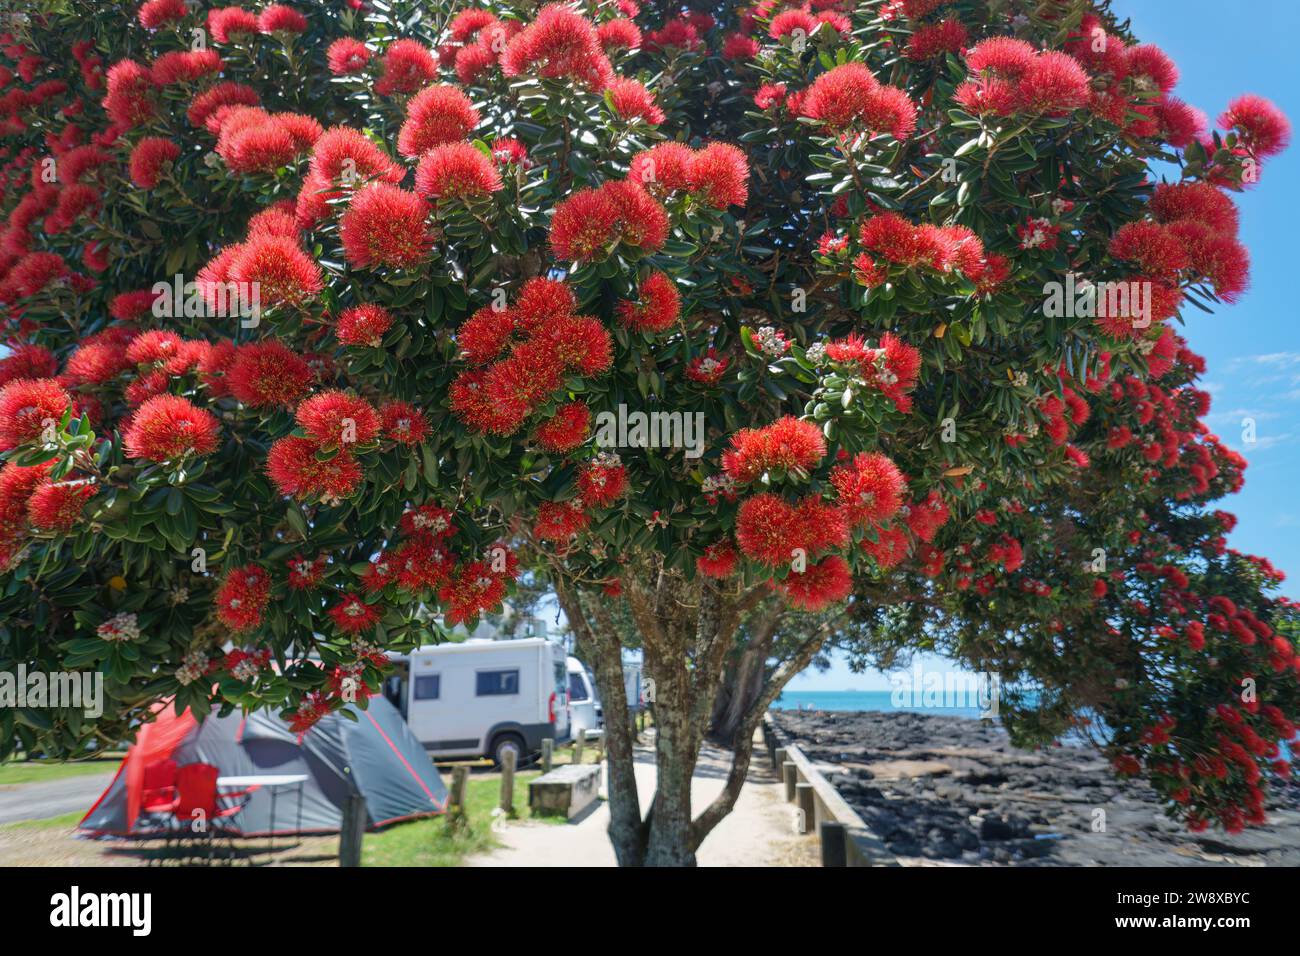 Takapuna beach in summer. Pohutukawa trees in full bloom. Campervans and tents in the background. Auckland. Stock Photo